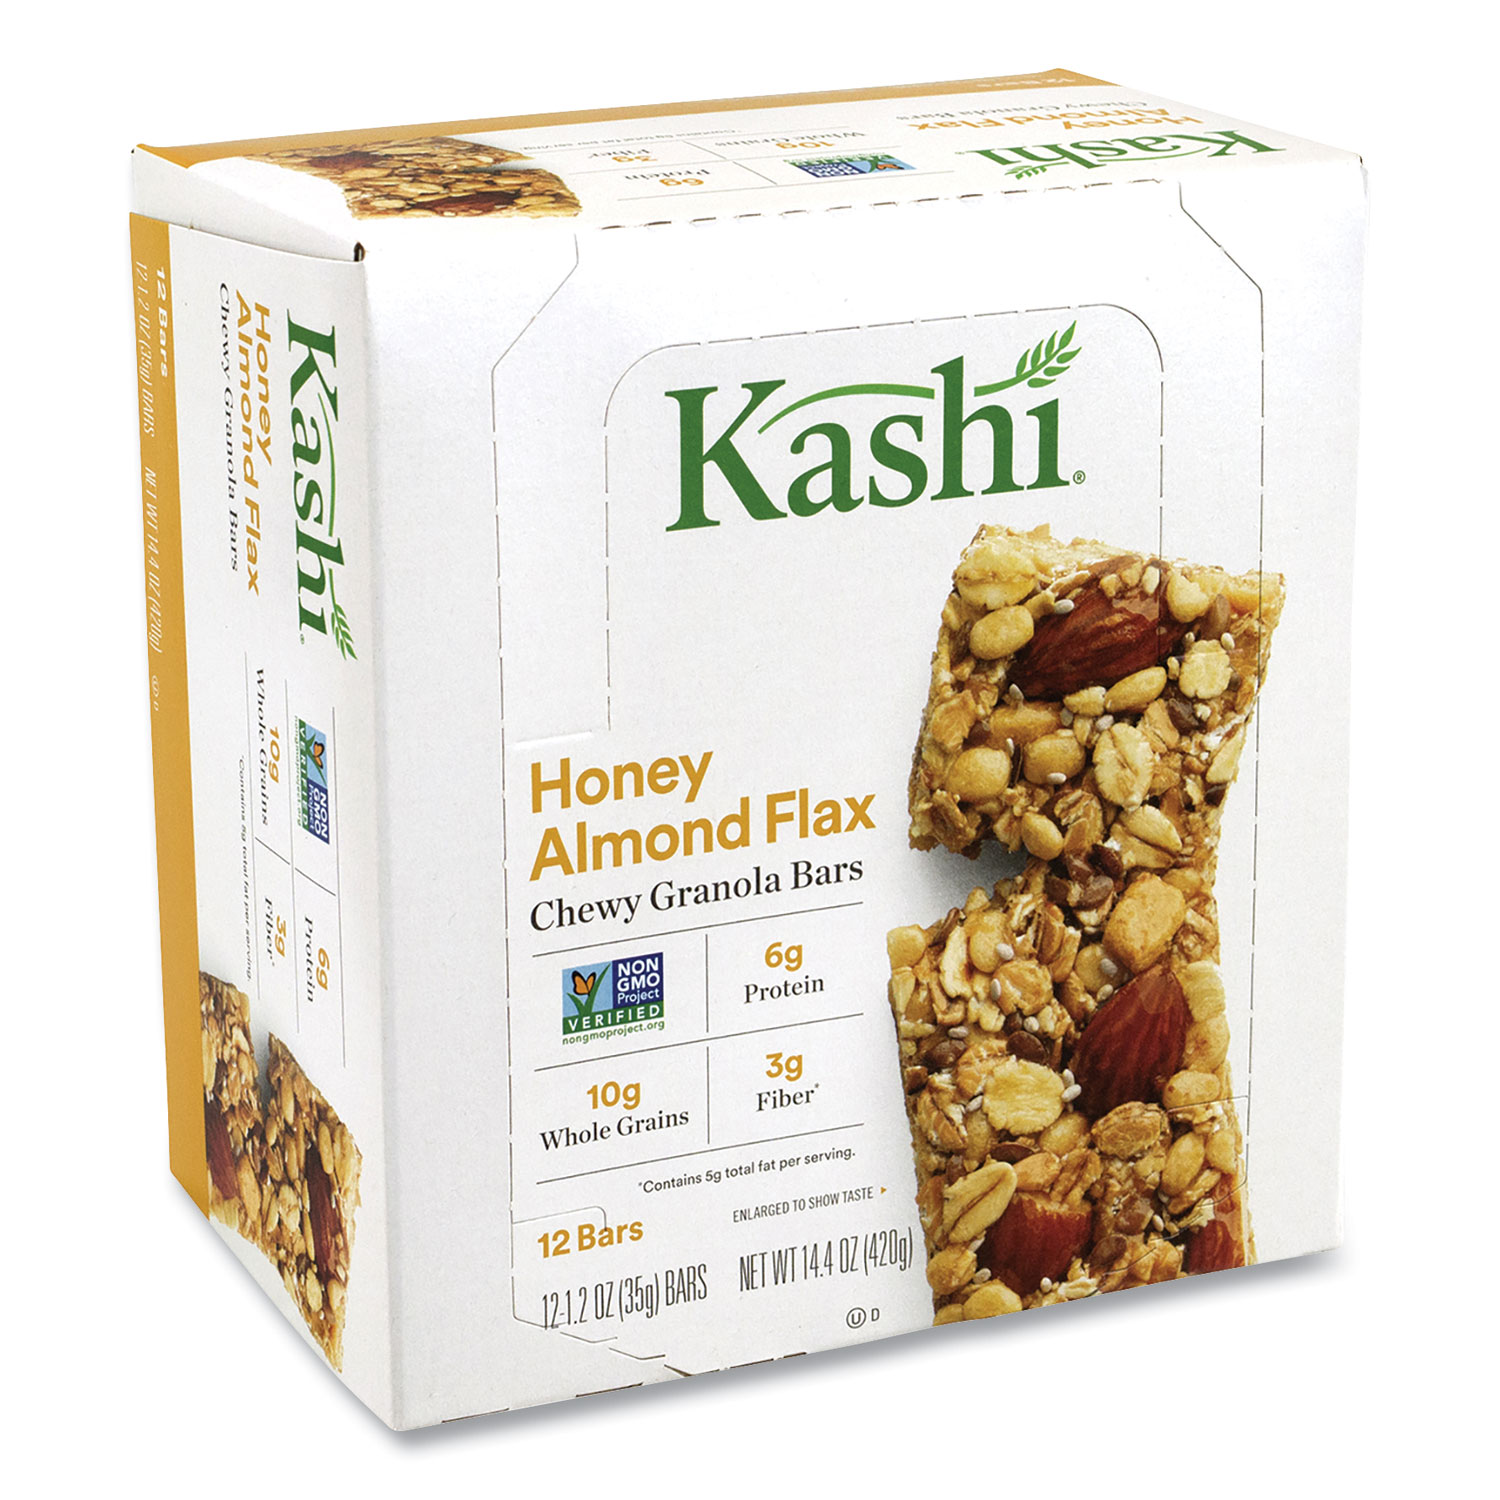  Kashi 1862737949 Chewy Granola Bars, Honey Almond Flax, 1.2 oz Bar, 12 Bars/Box, 2 Boxes/Pack, Free Delivery in 1-4 Business Days (GRR29500065) 